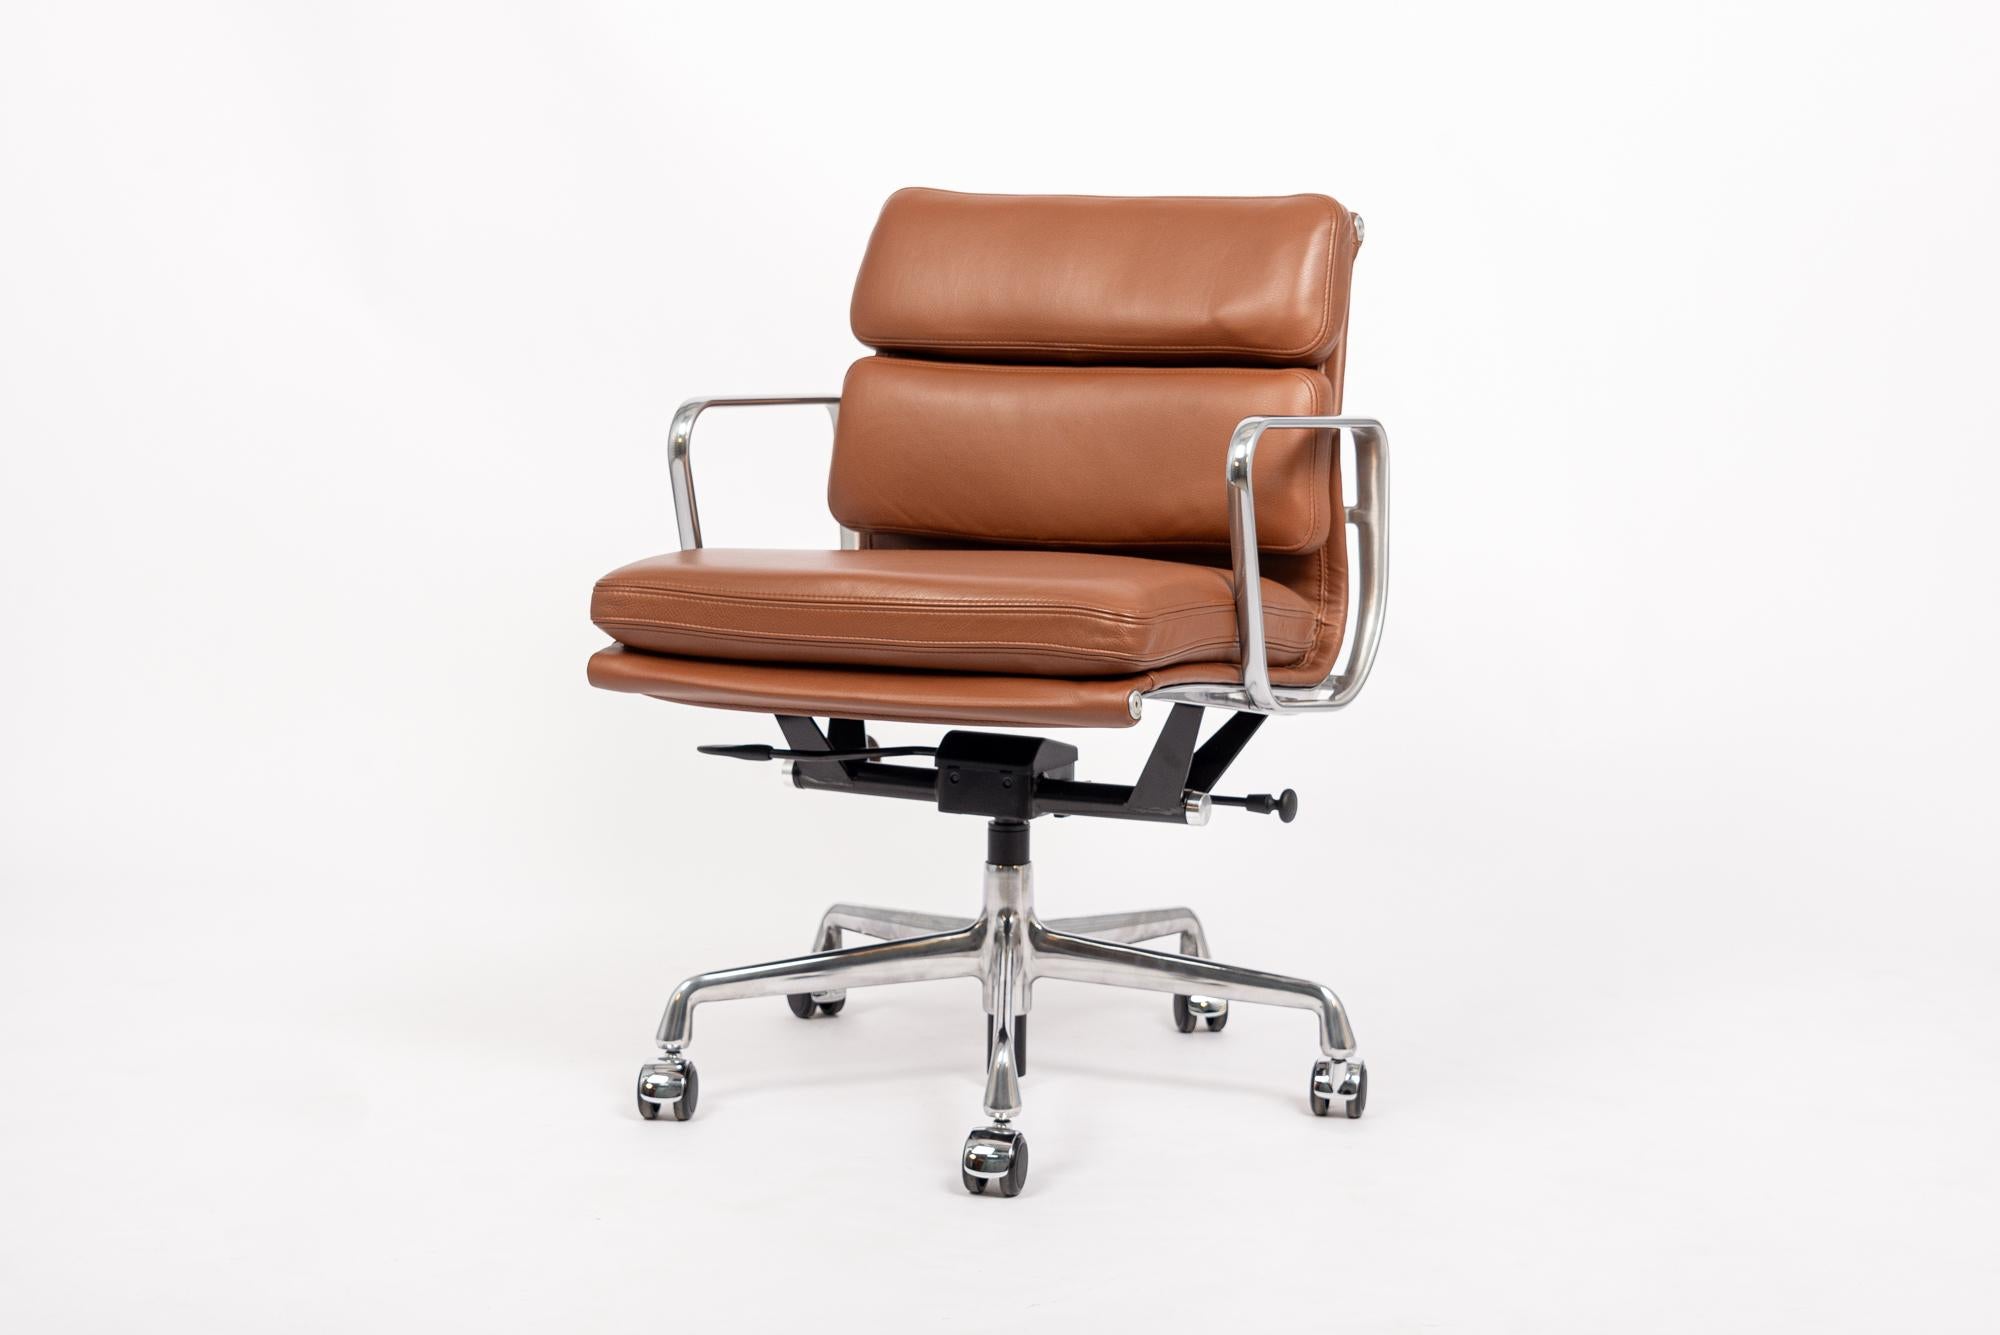 This authentic Eames for Herman Miller Soft Pad Management Height brown leather office chair from the Aluminum Group Collection was manufactured in the 2000s. This classic mid century modern office chair was first introduced in 1969 by Charles and